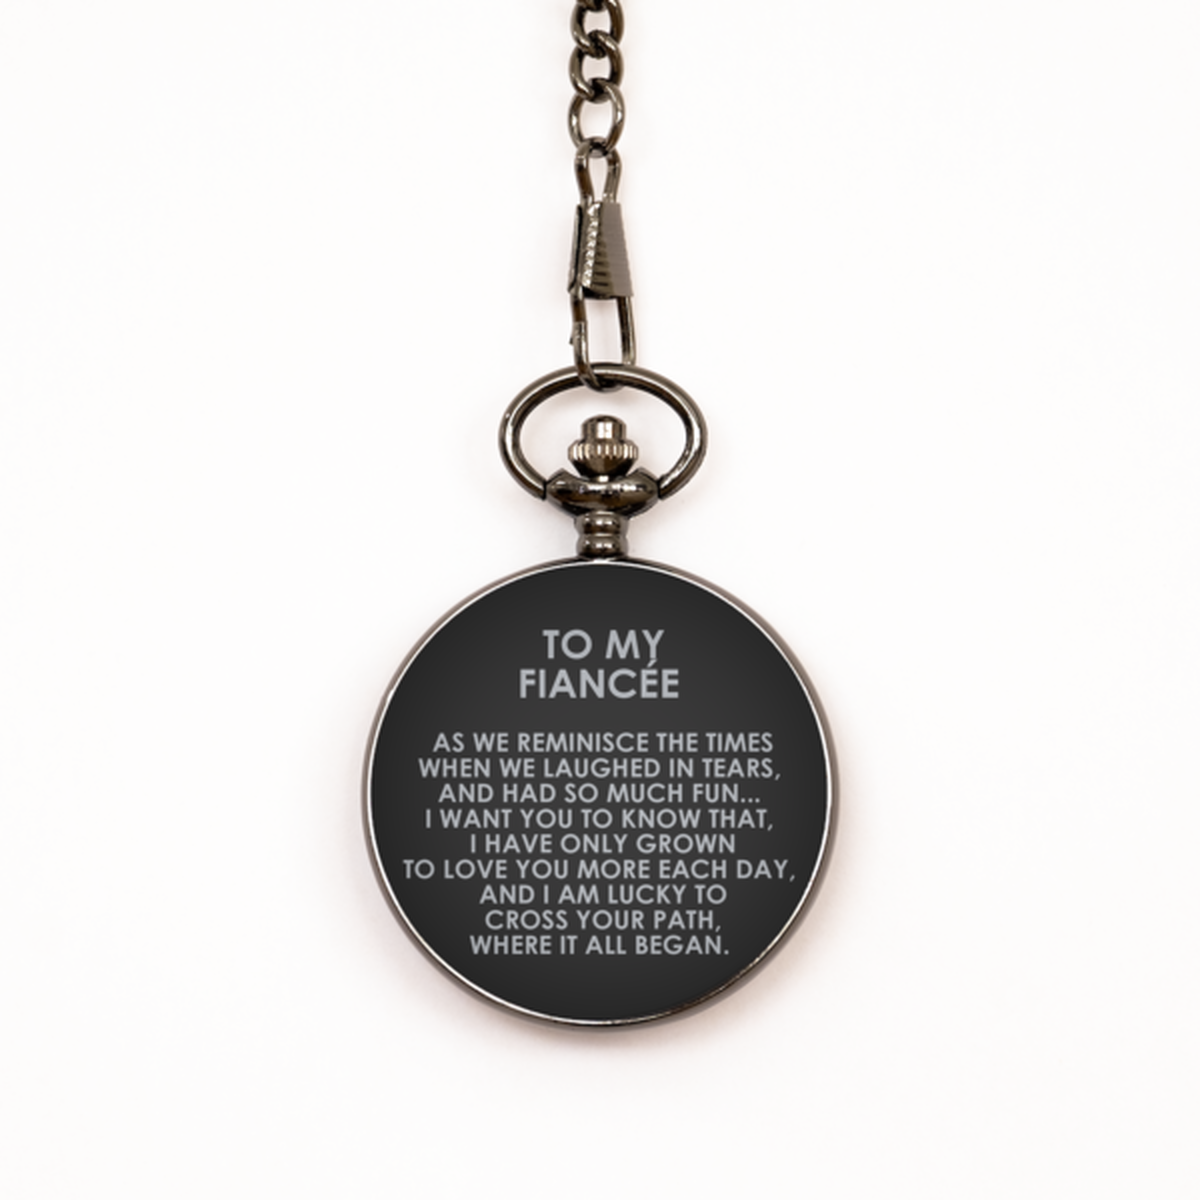 To My Fiancée  Black Pocket Watch, I Am Lucky To Cross Your Path, Birthday Gifts For Fiancée  From Fiancé, Valentines Gifts For Women